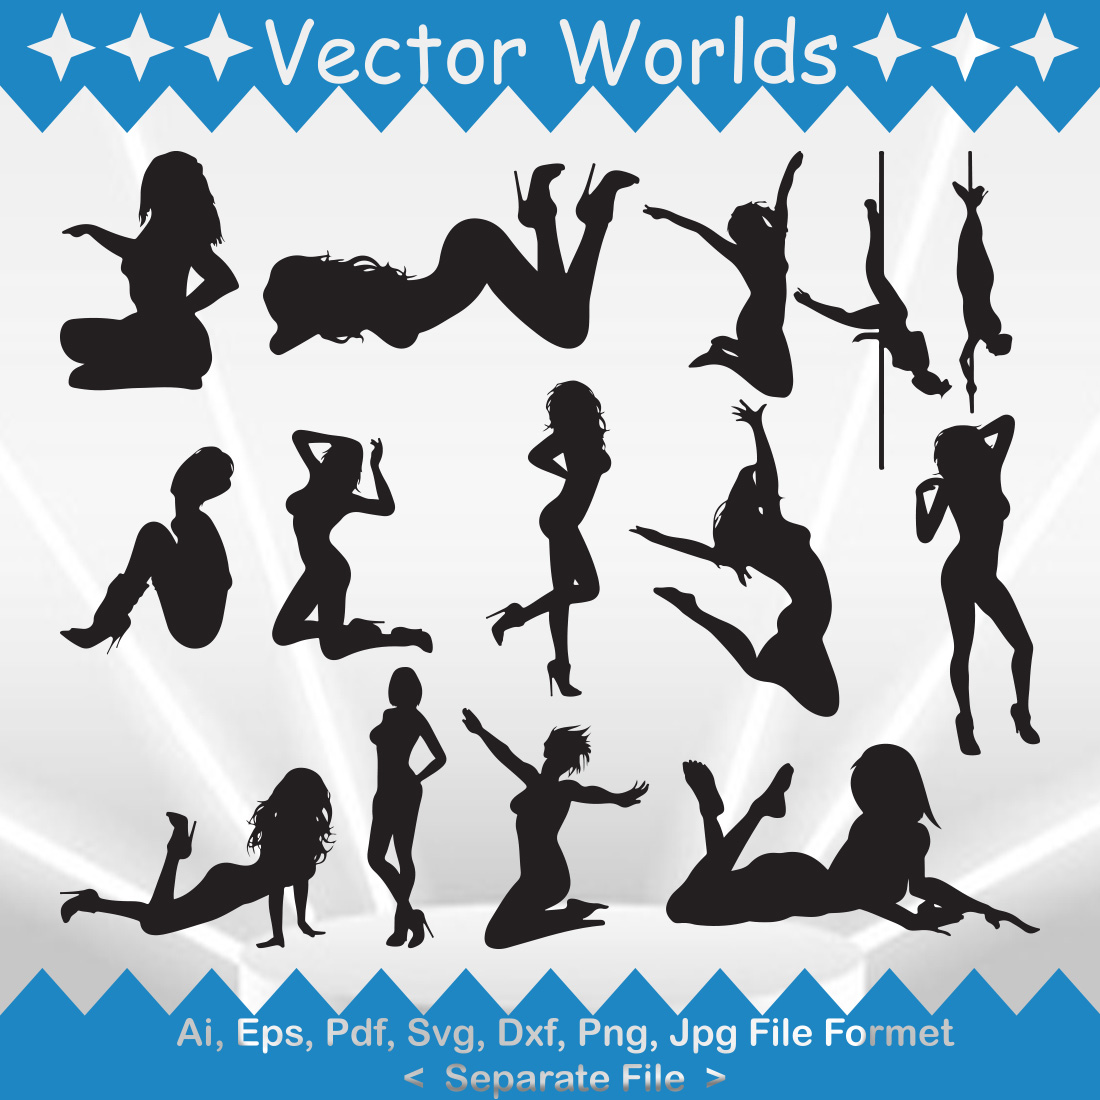 Set of vector amazing images of erotic women silhouettes.